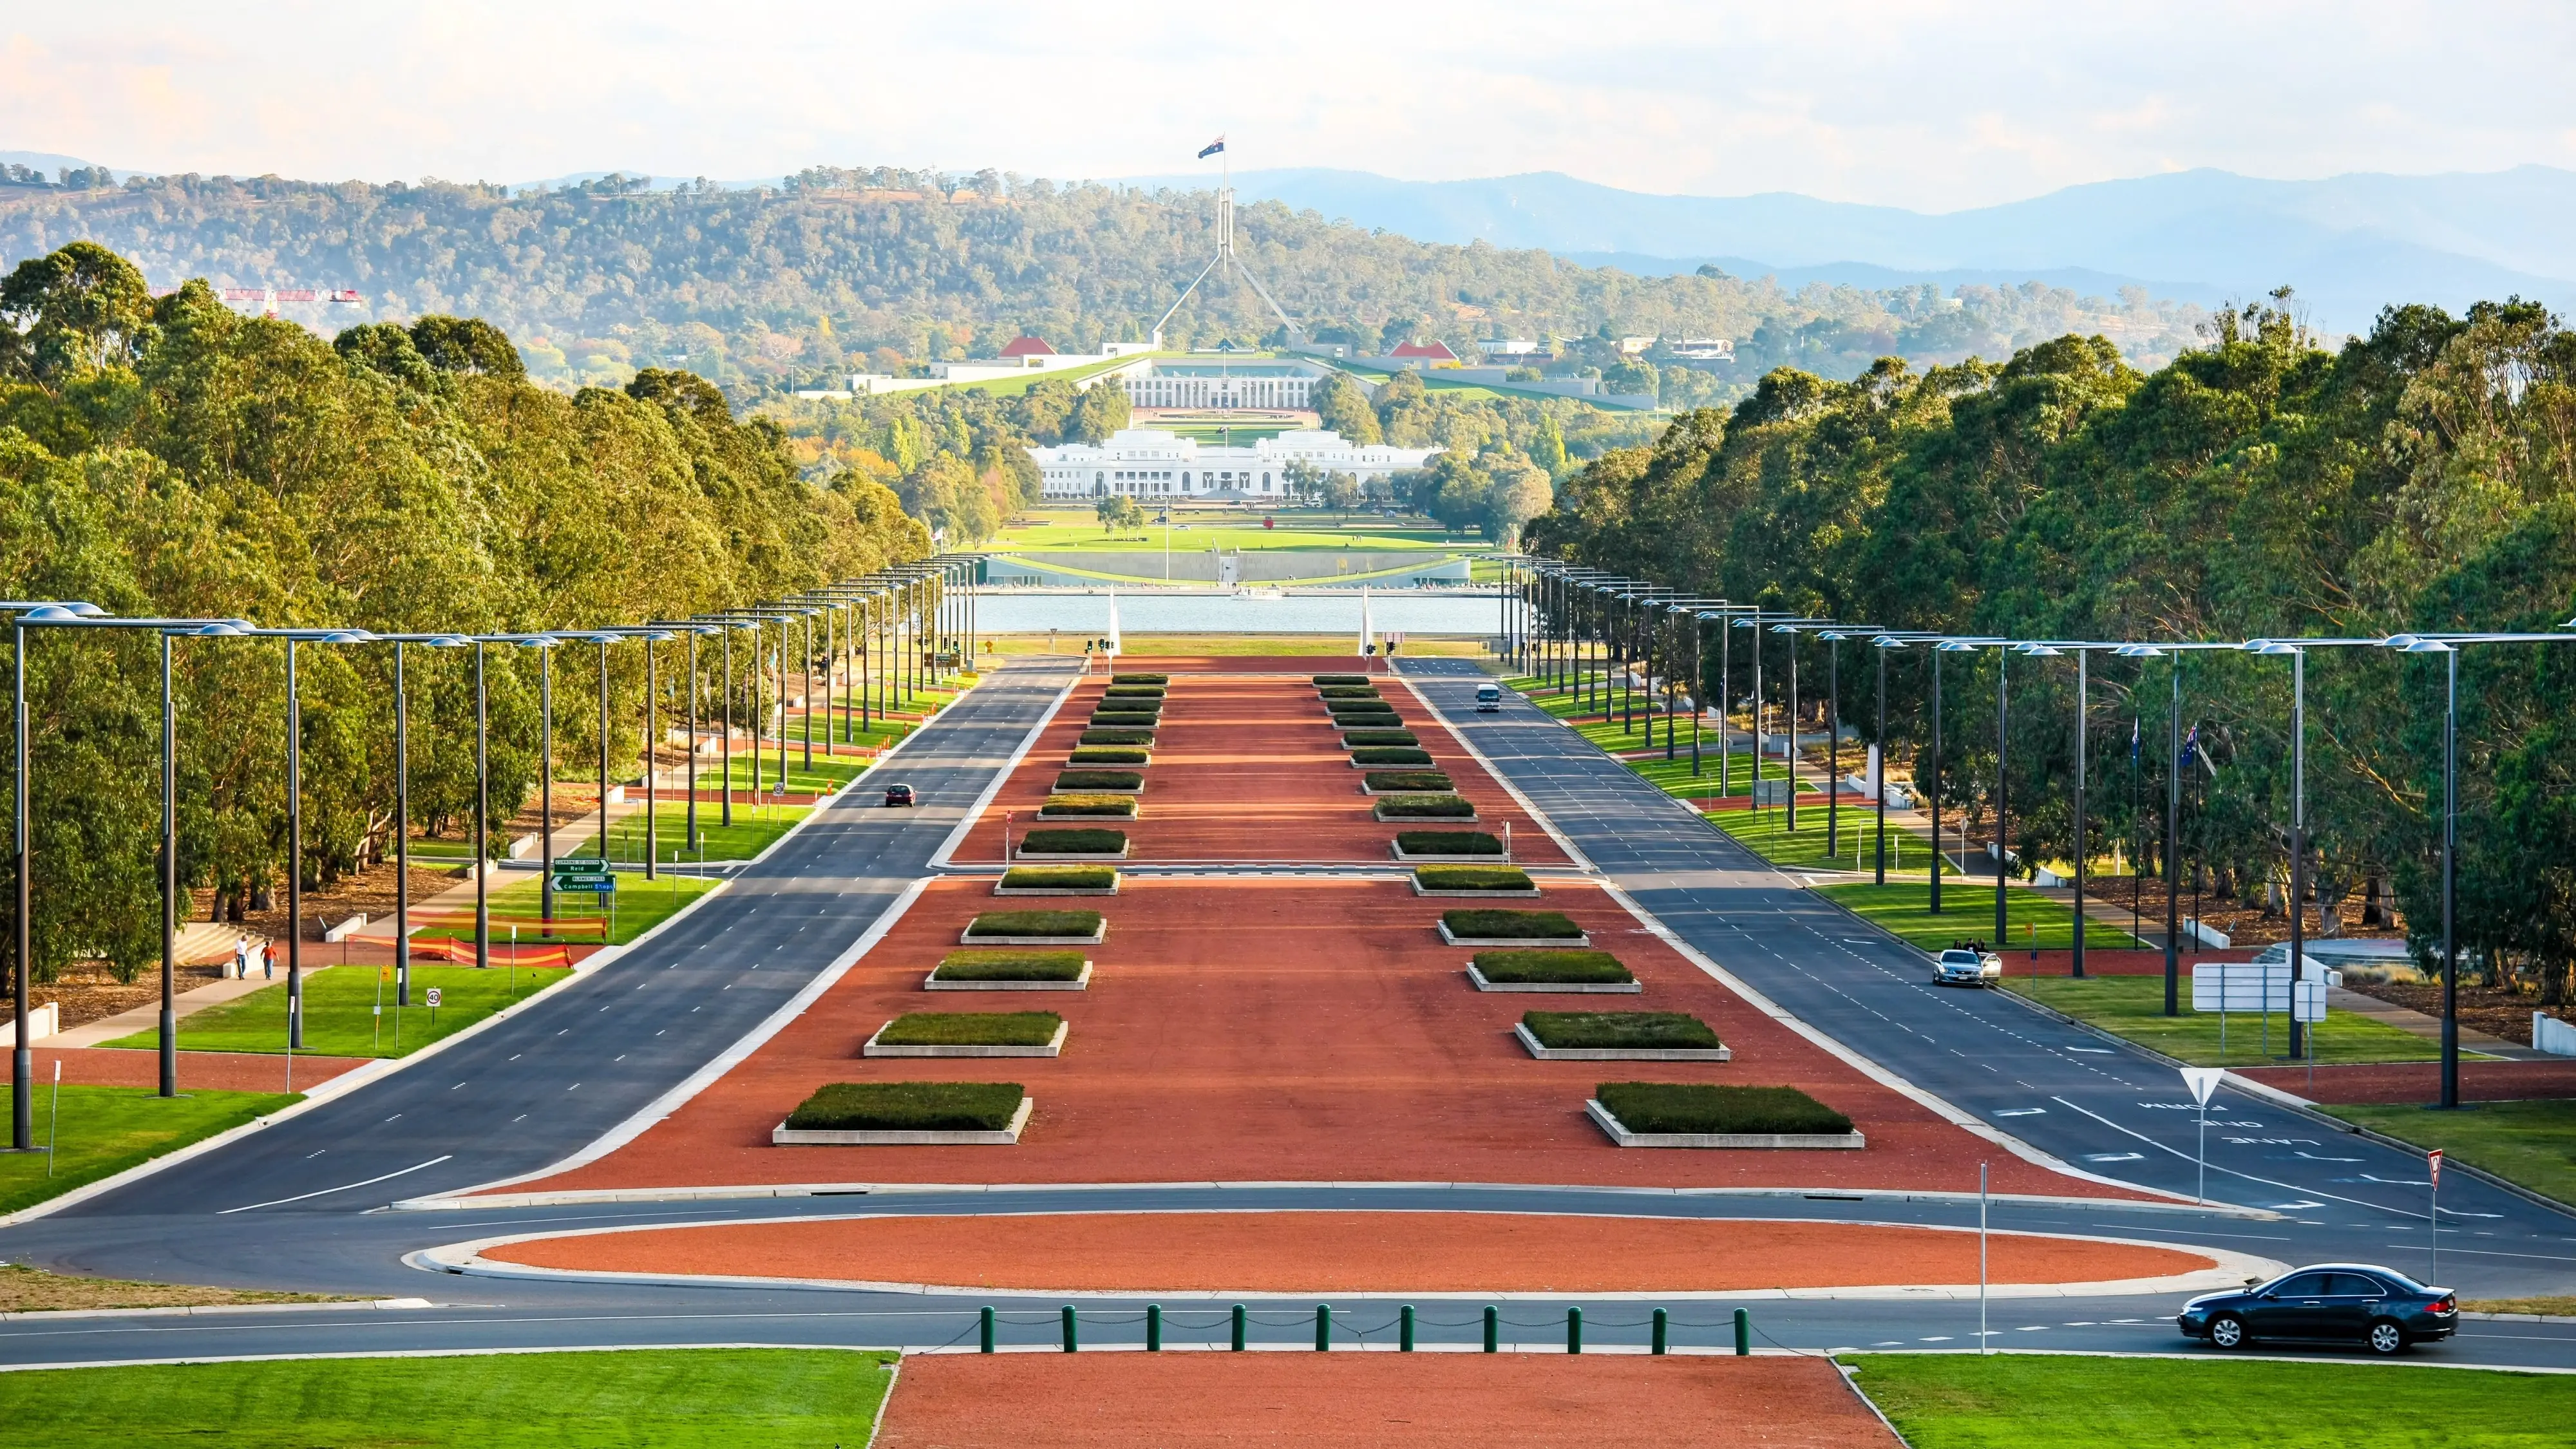 Wide-angle view of Parliament House with bushland in background on a sunny day, Canberra. Image credit: stock.adobe.com